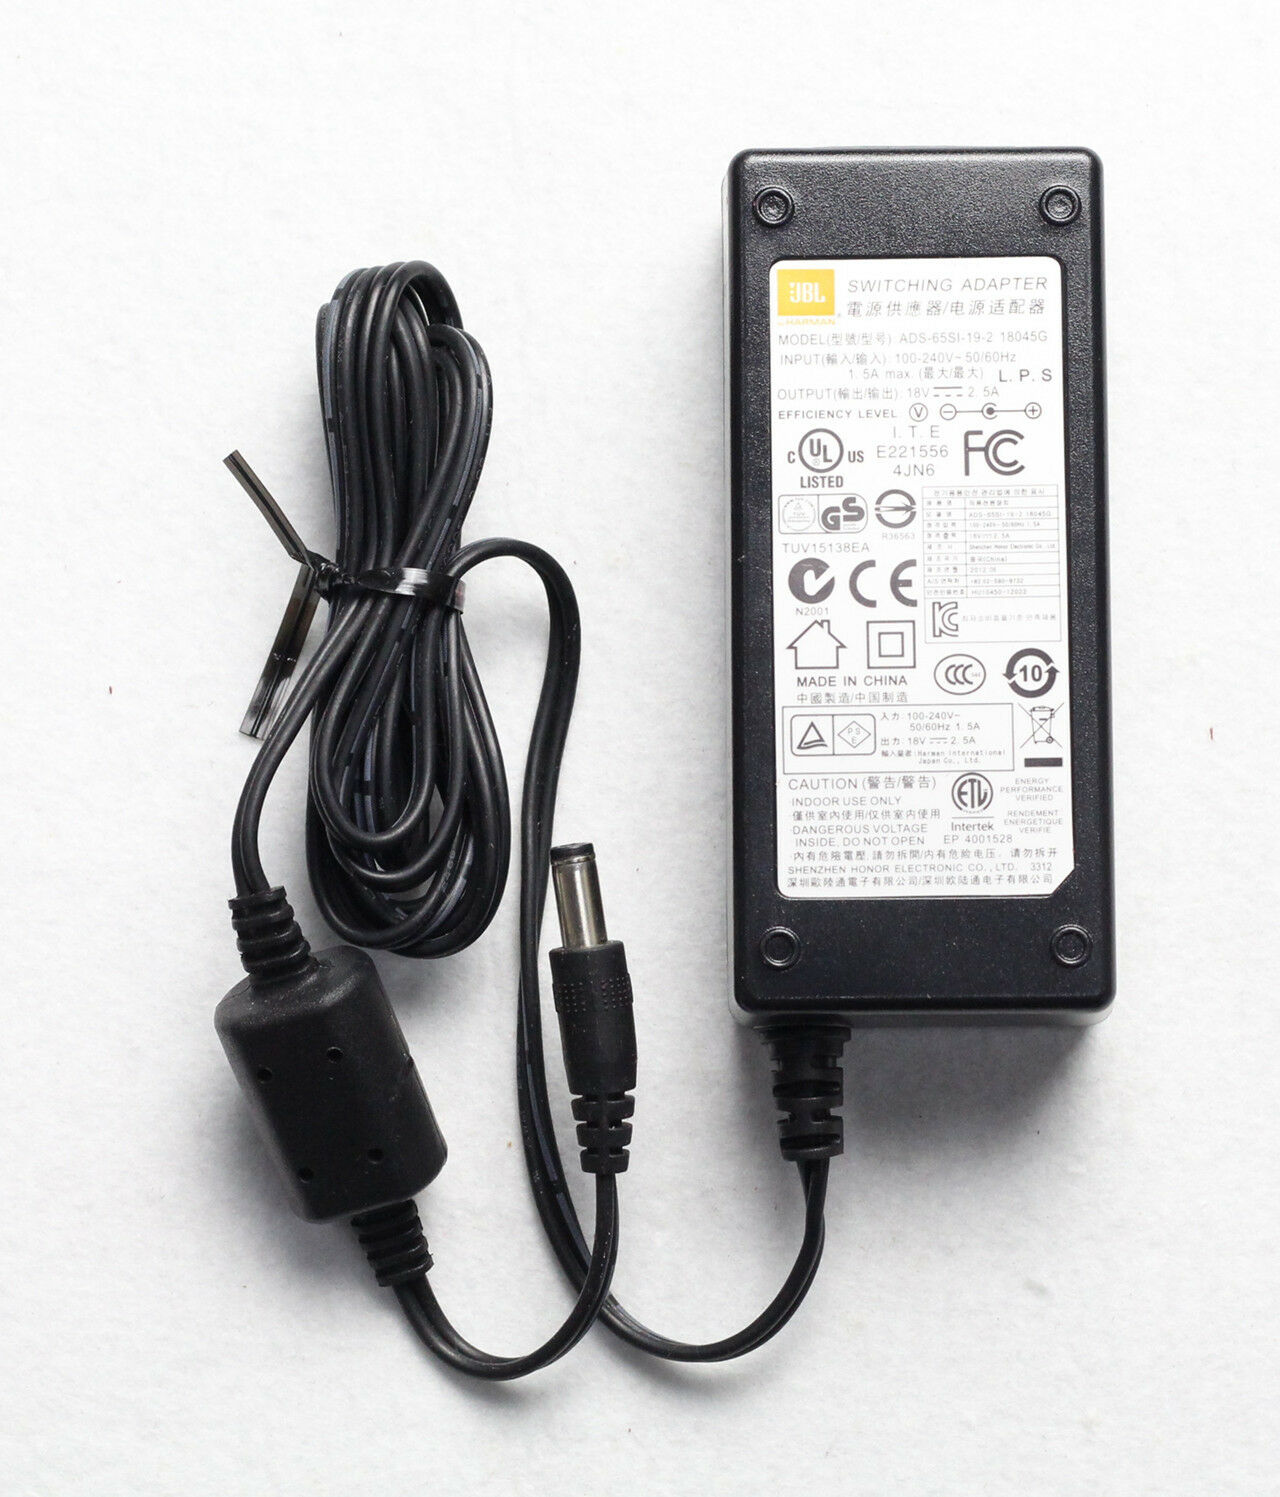 Switching Power Supply AC Adapter JBL ADS-65SI-19-2 18045G 18V-2.5A UPC: Does not apply Model: ADS-65SI-19-2 18045G